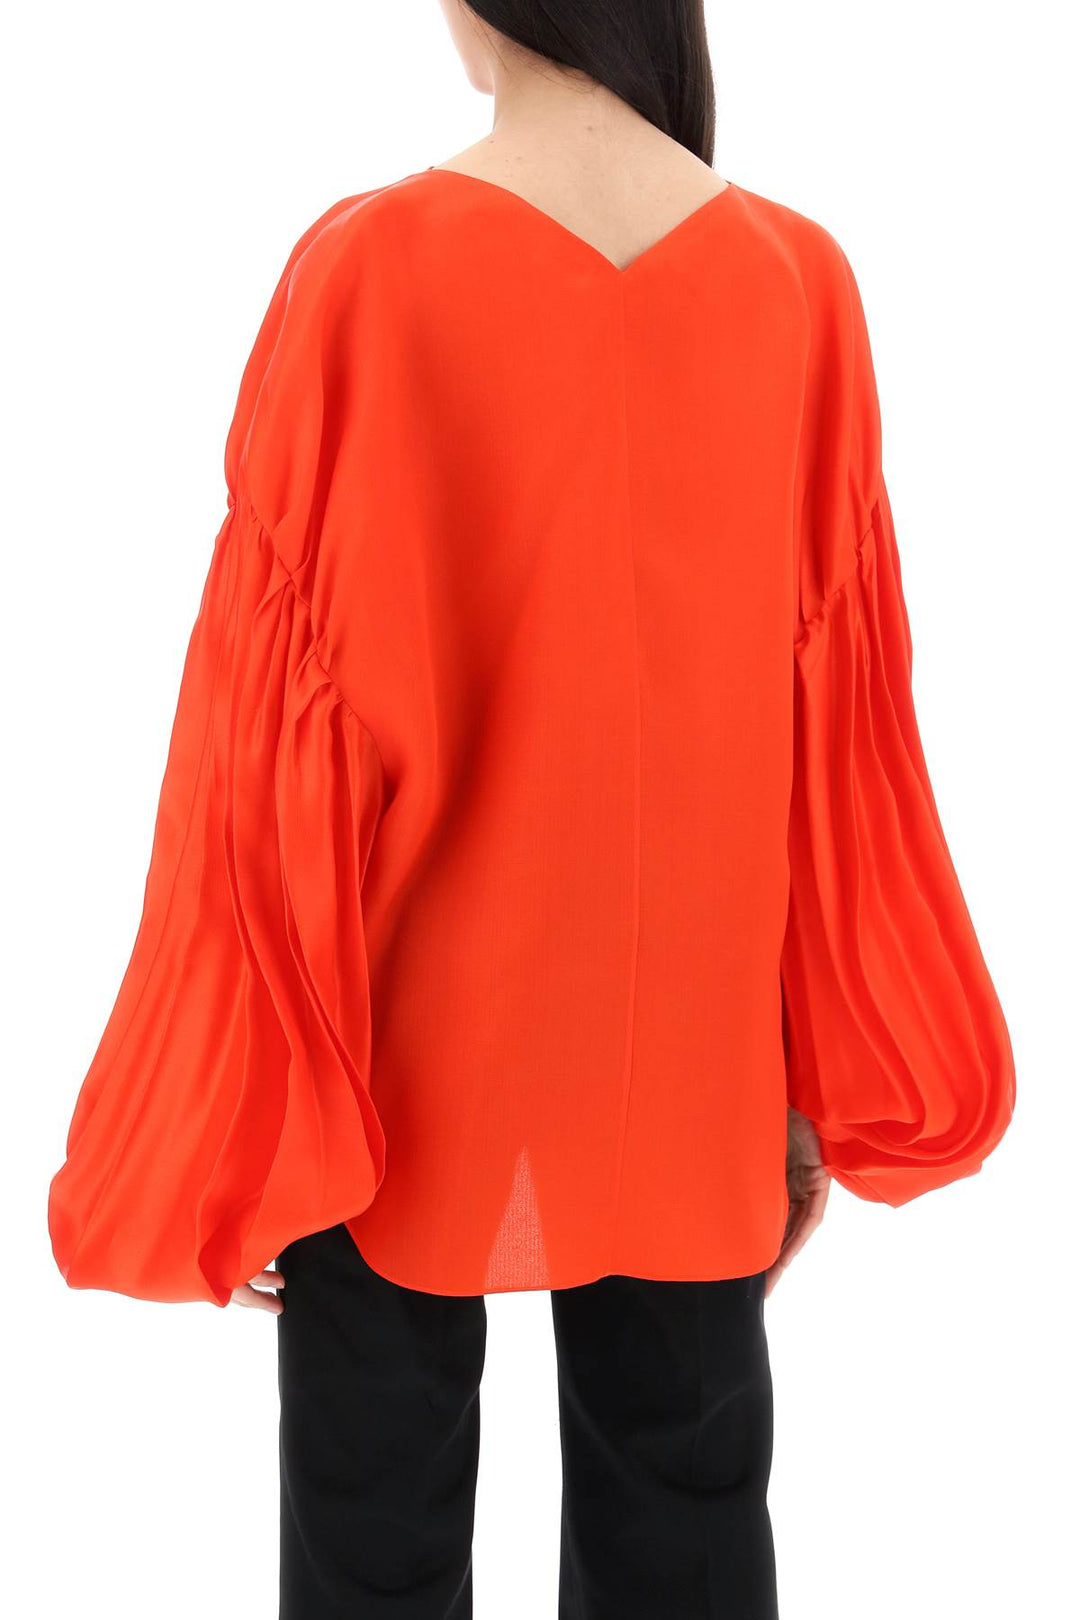 Khaite Replace With Double Quotequico Blouse With Puffed Sleeves   Red